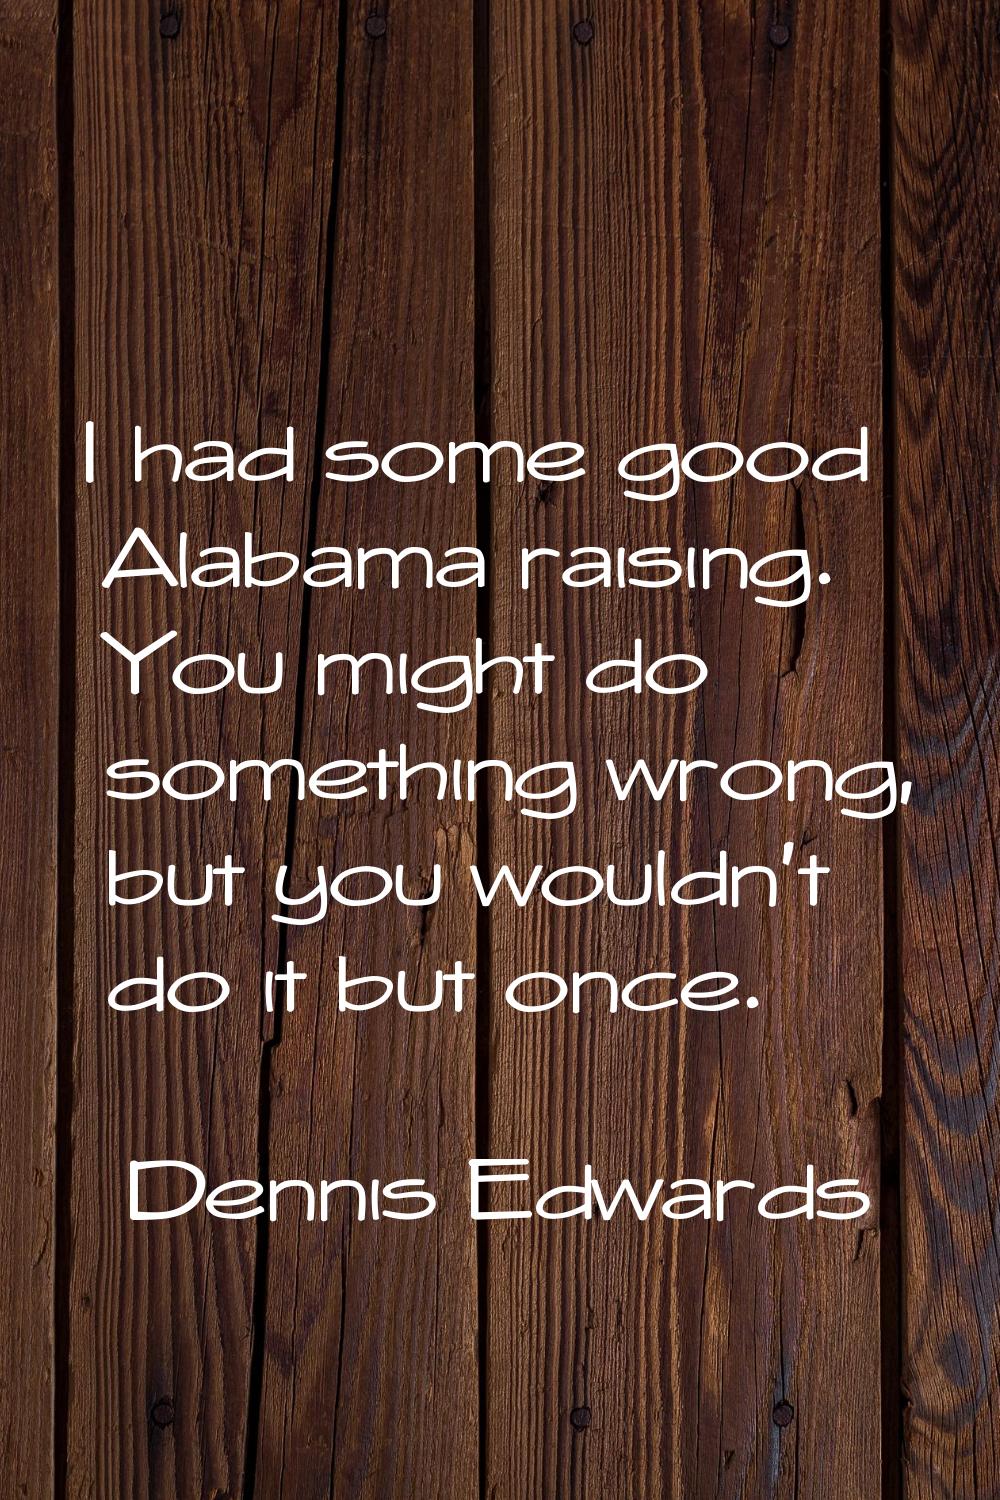 I had some good Alabama raising. You might do something wrong, but you wouldn't do it but once.